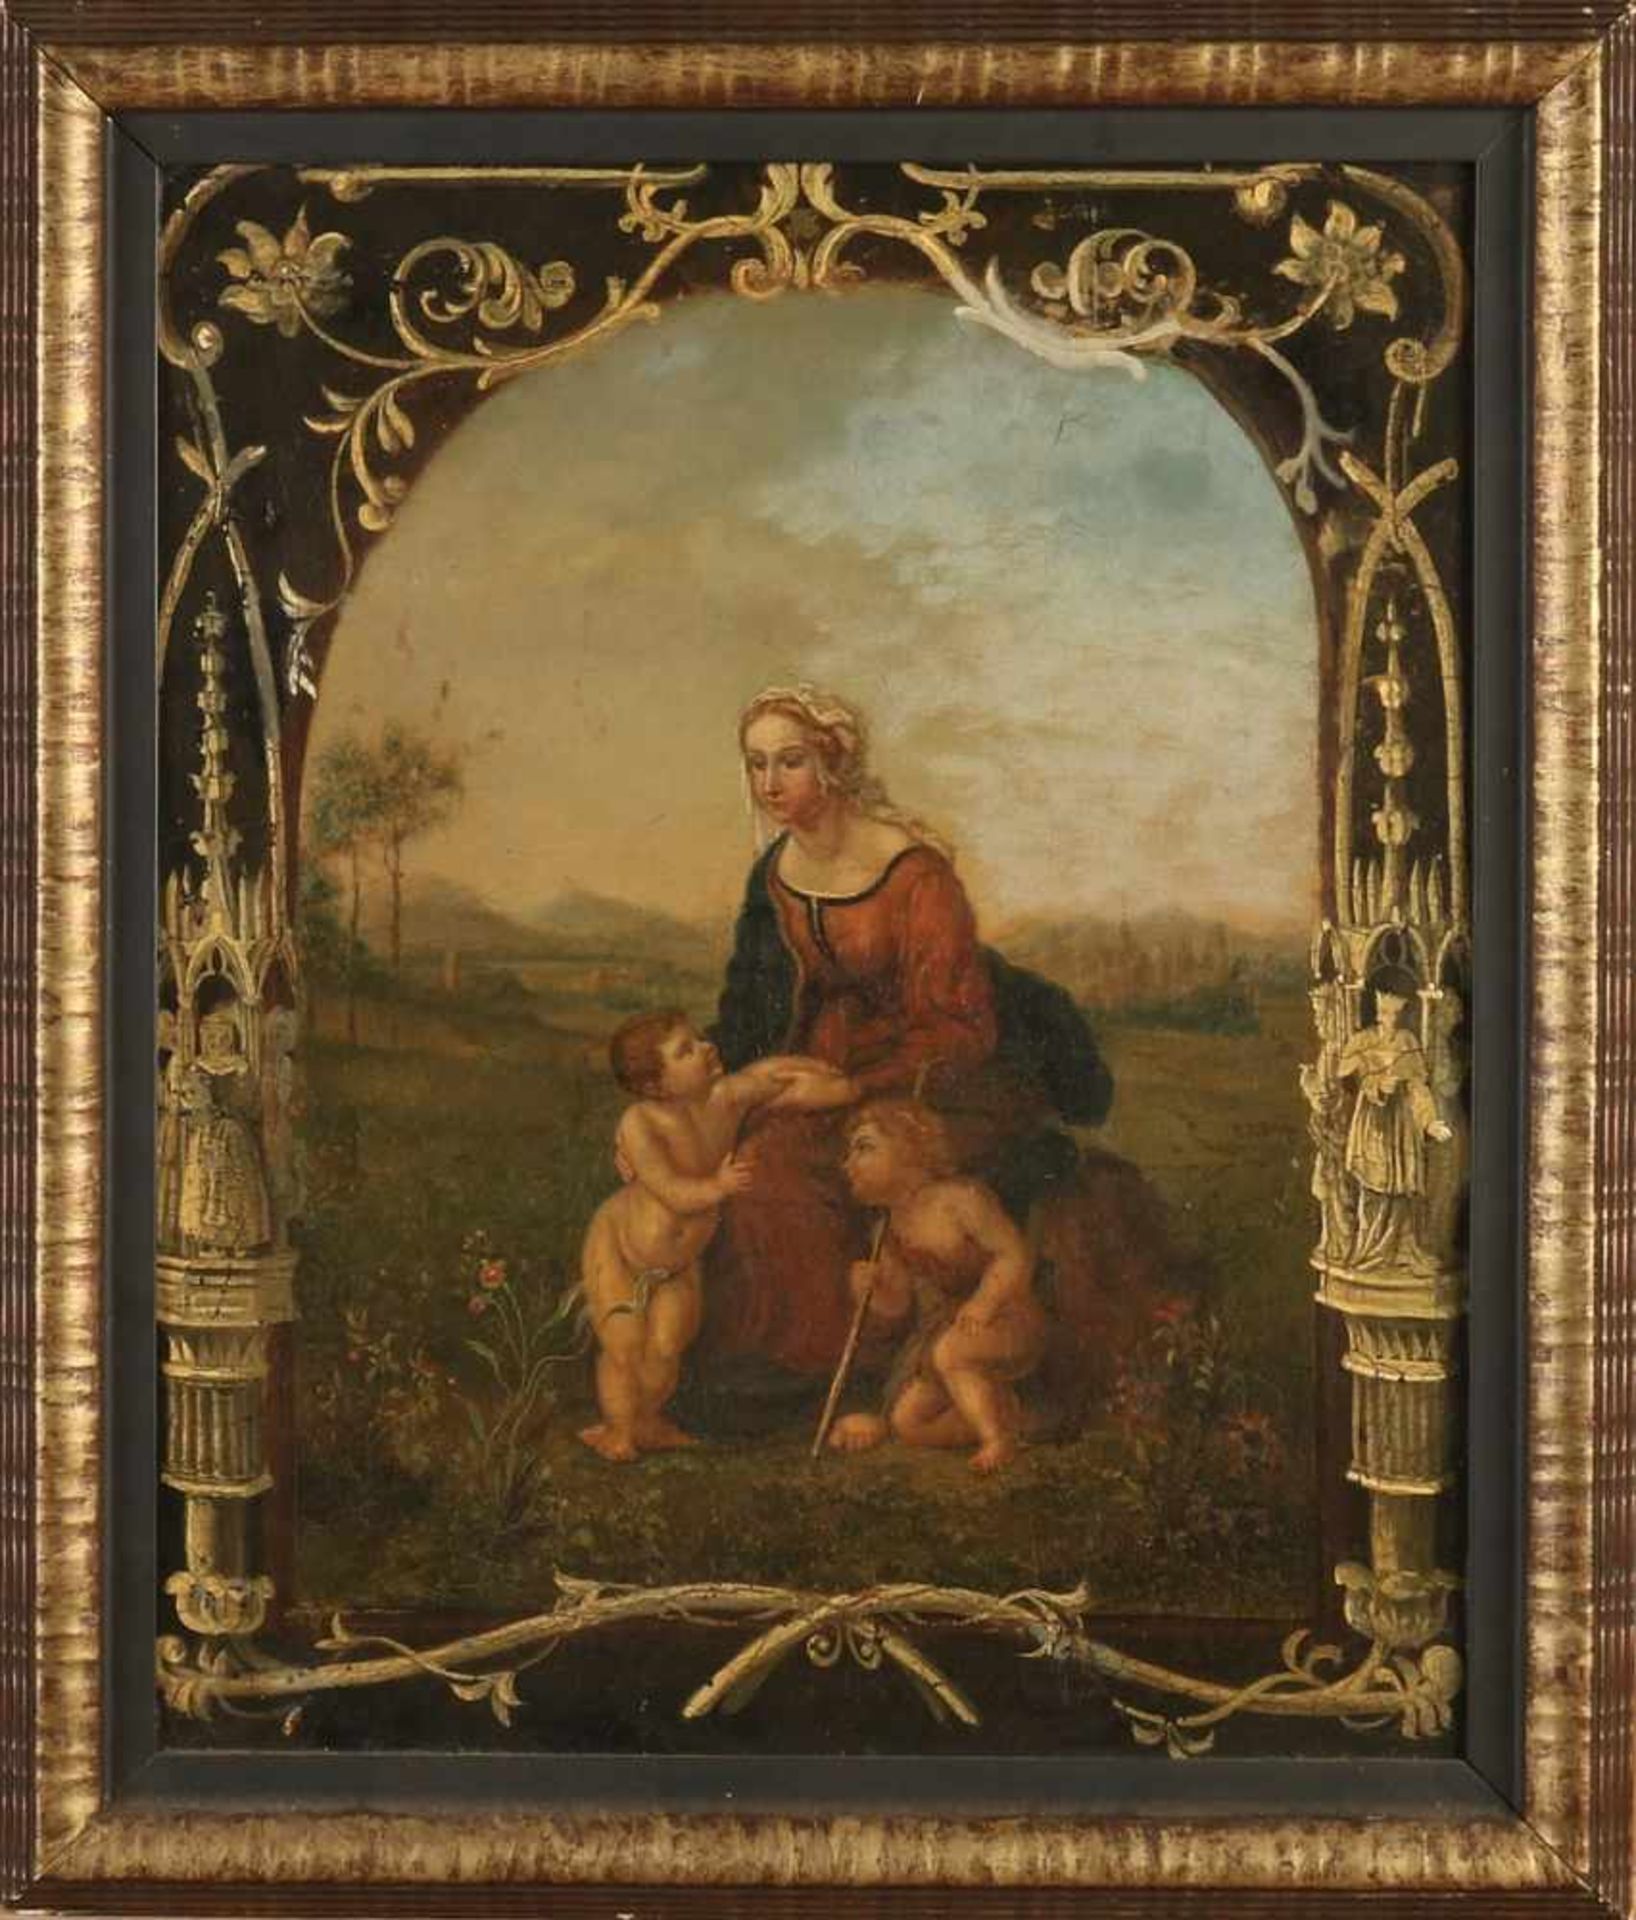 Unsigned. Circa 1800. Baroque painting with women and putti in landscape. Some inschilderingen.